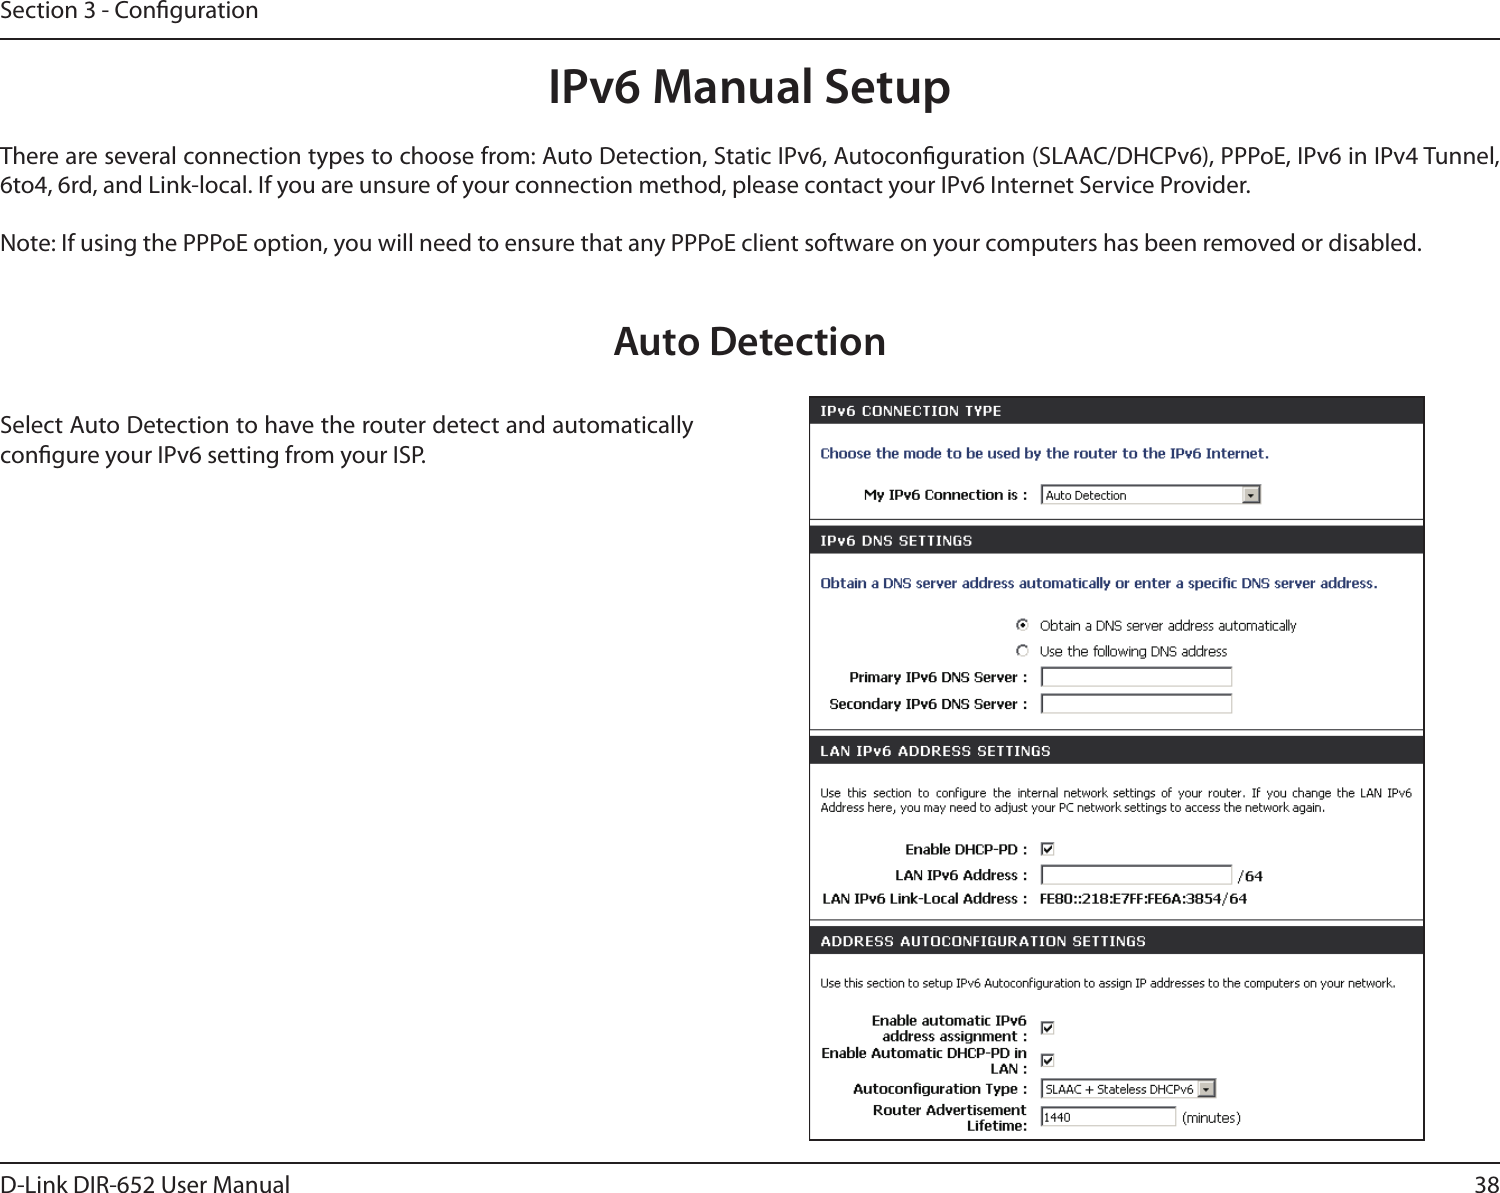 38D-Link DIR-652 User ManualSection 3 - CongurationIPv6 Manual SetupThere are several connection types to choose from: Auto Detection, Static IPv6, Autoconguration (SLAAC/DHCPv6), PPPoE, IPv6 in IPv4 Tunnel, 6to4, 6rd, and Link-local. If you are unsure of your connection method, please contact your IPv6 Internet Service Provider. Note: If using the PPPoE option, you will need to ensure that any PPPoE client software on your computers has been removed or disabled.Auto DetectionSelect Auto Detection to have the router detect and automatically congure your IPv6 setting from your ISP.